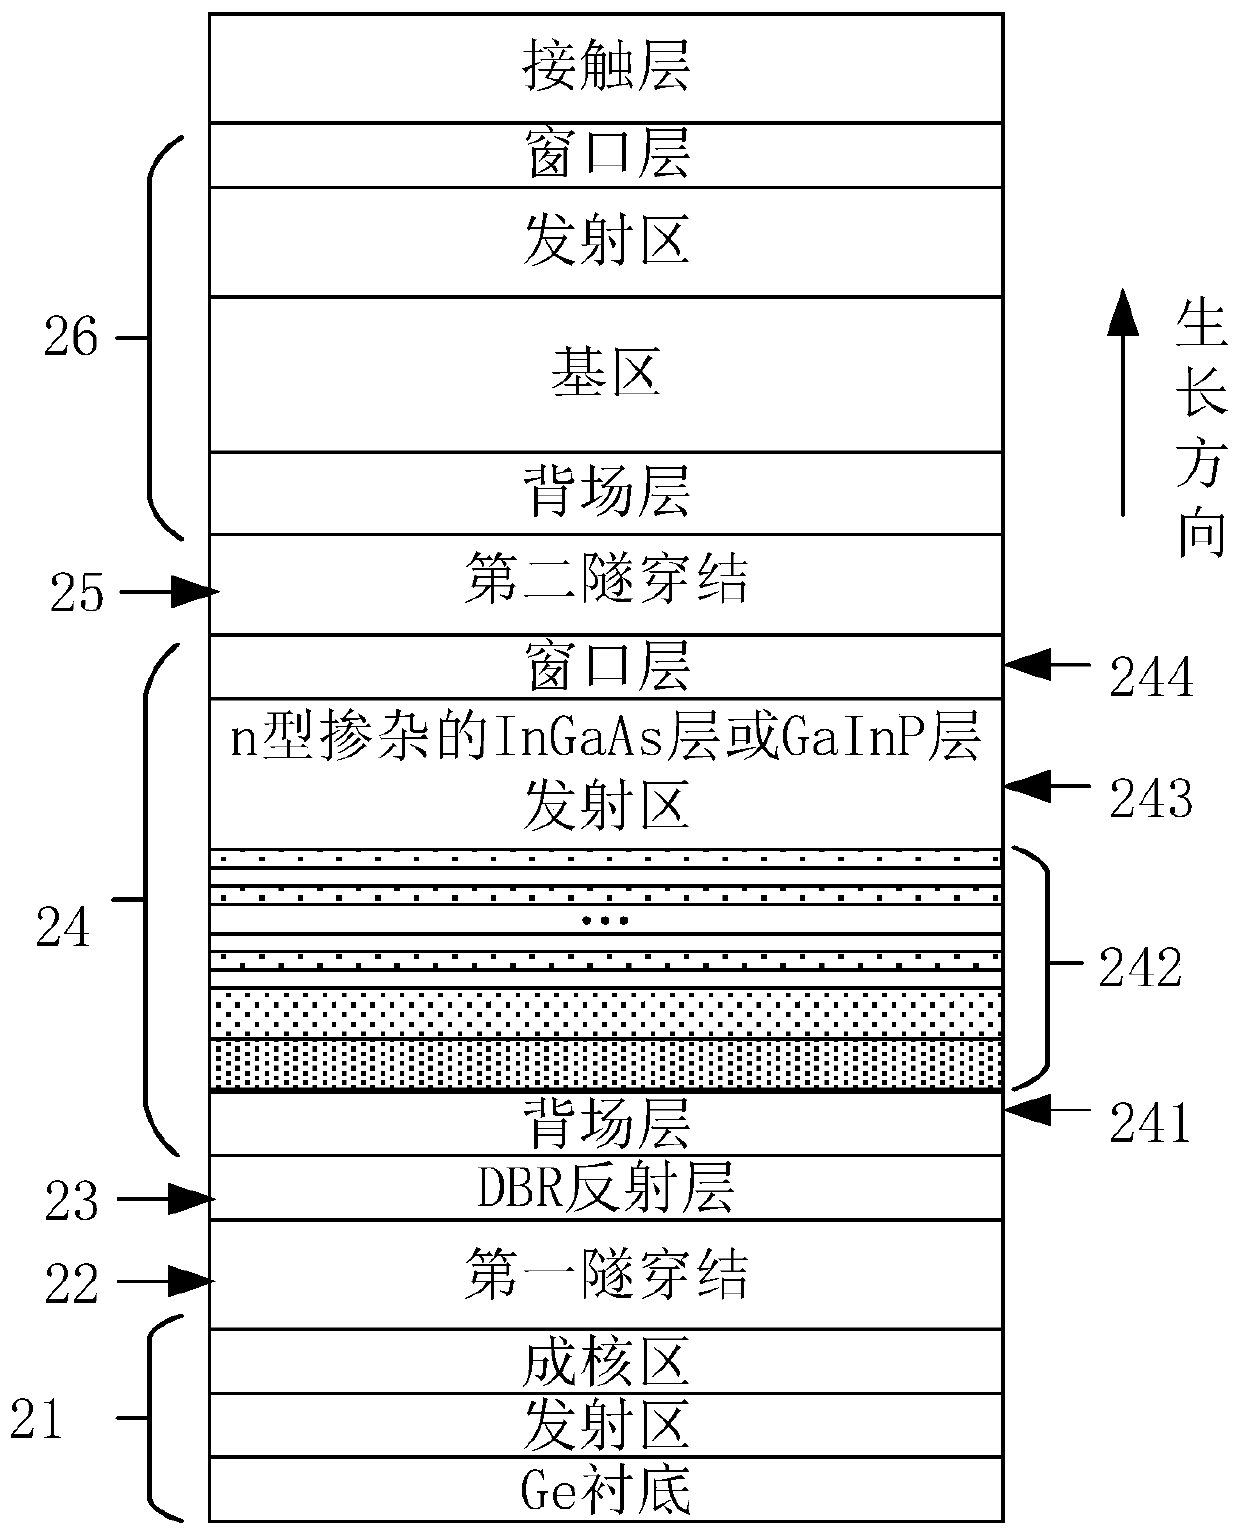 Arsenide multi-junction solar cell and manufacturing method thereof